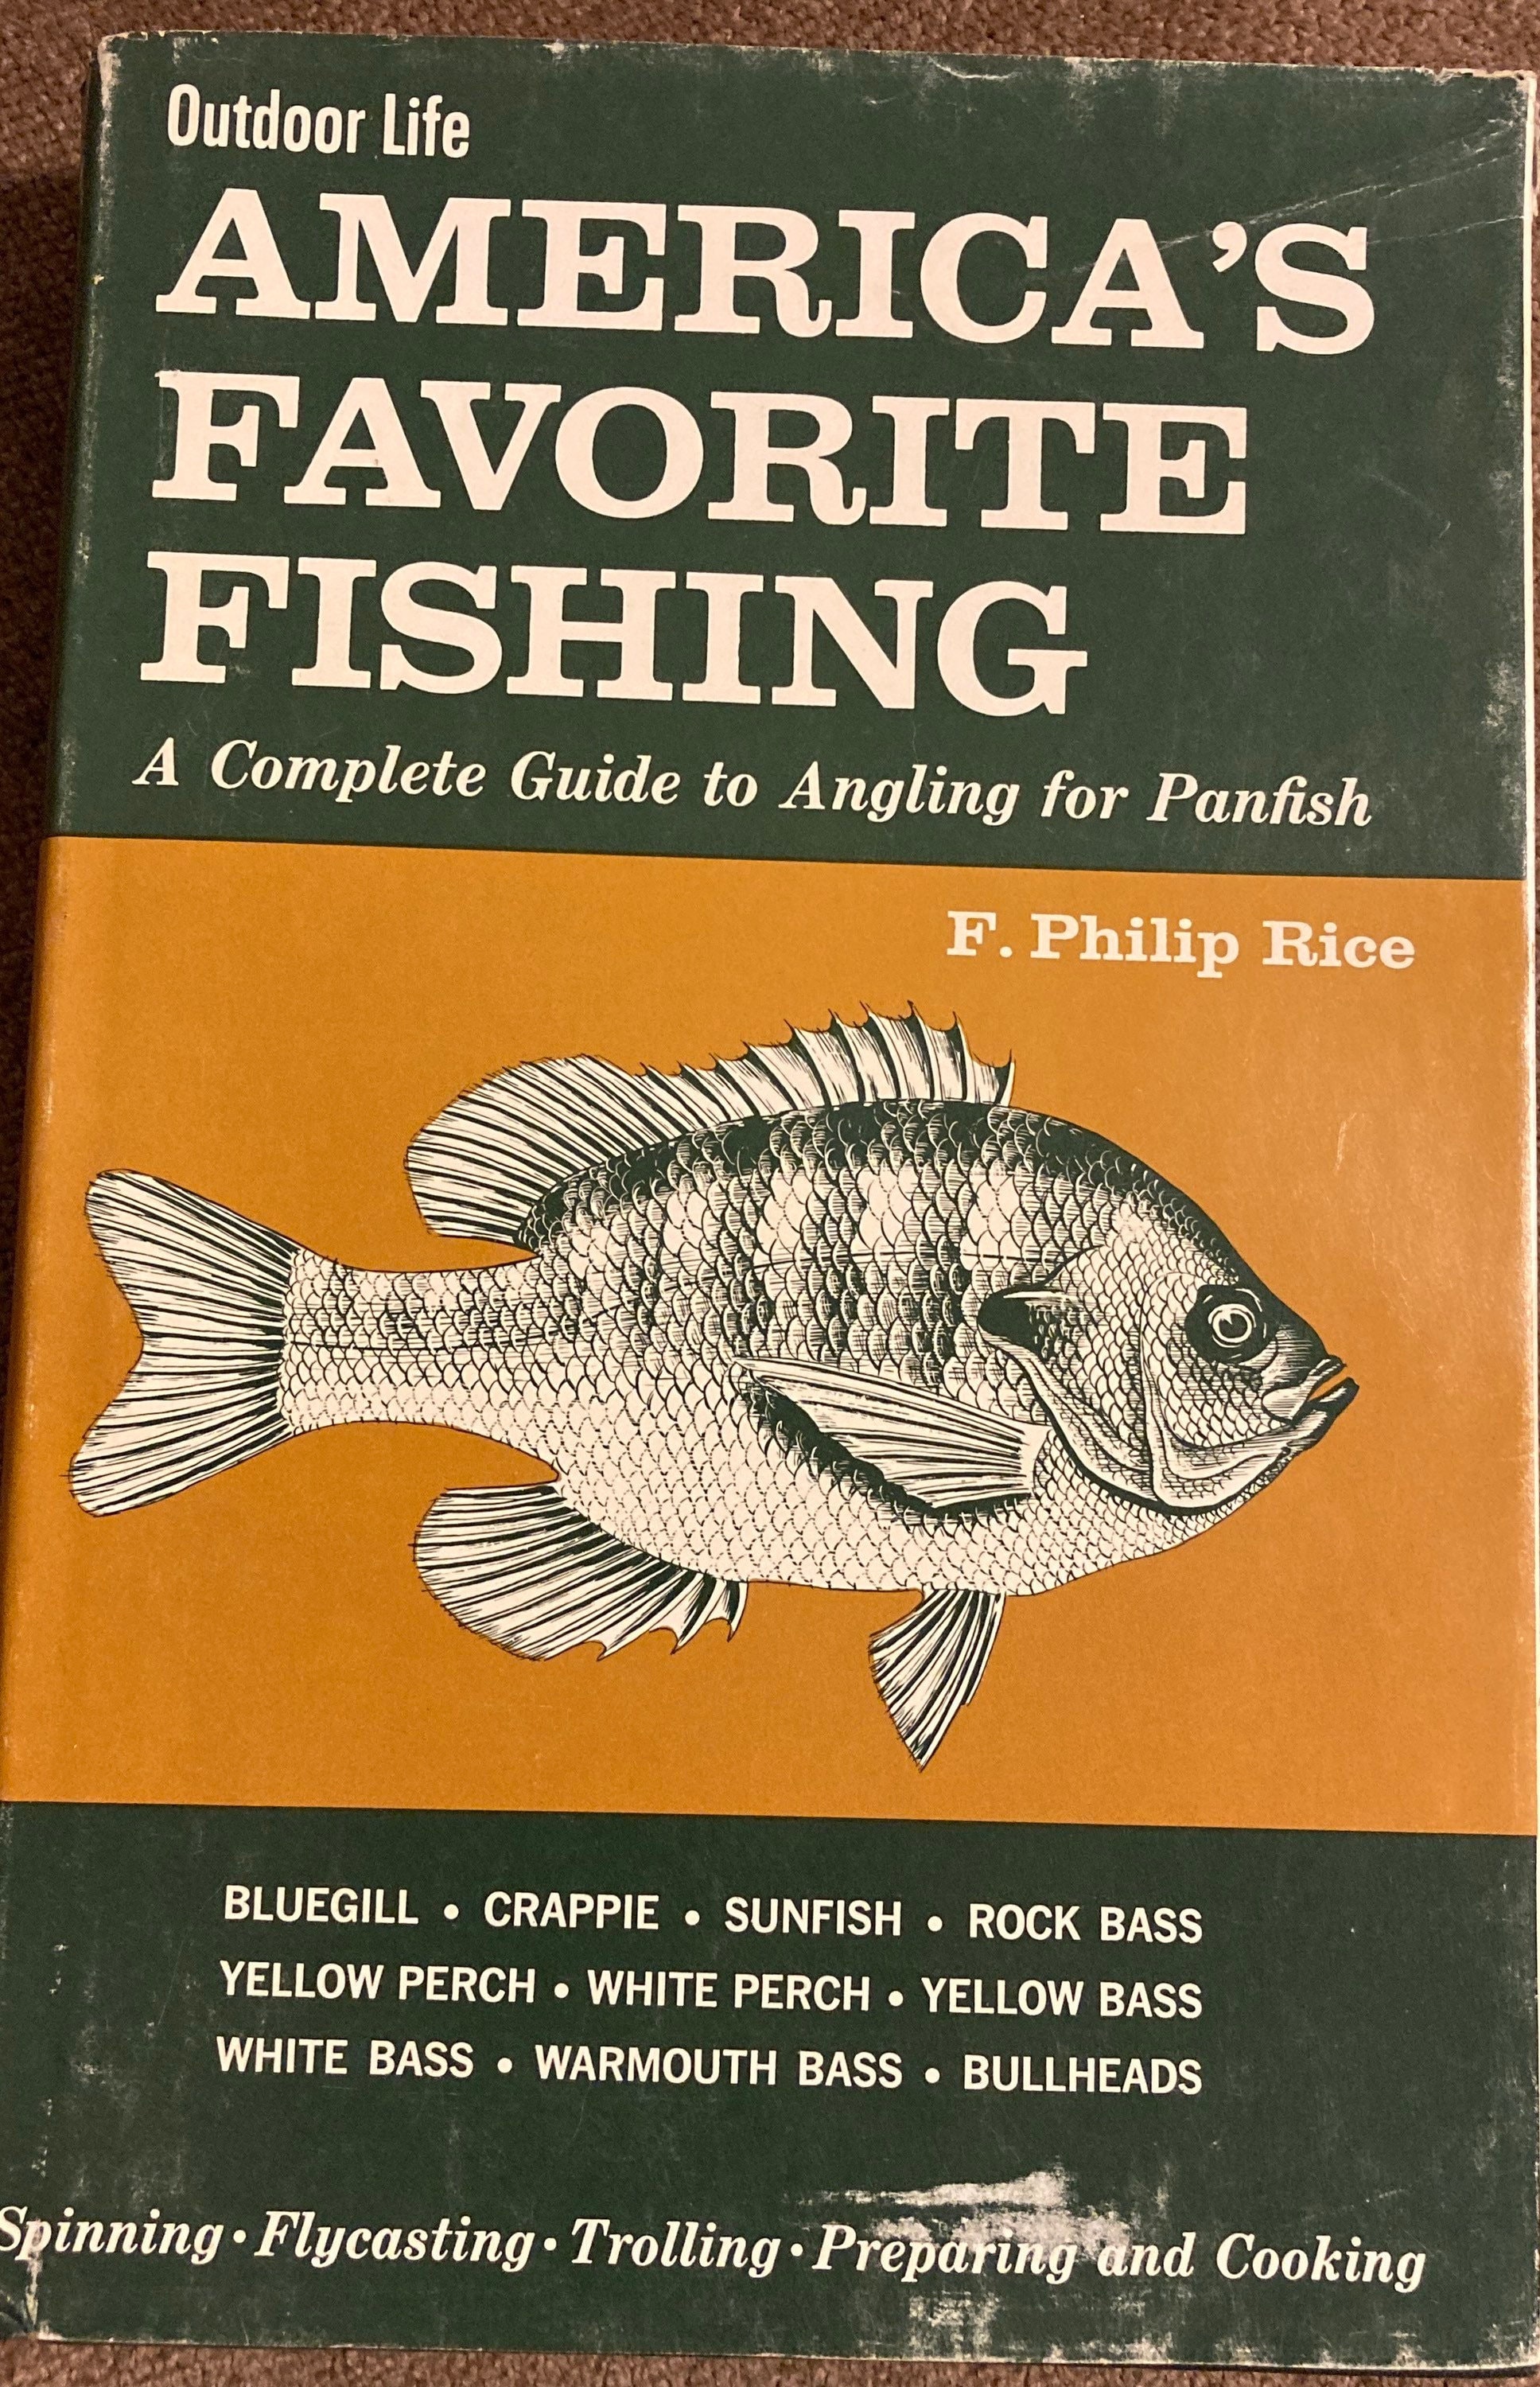 1964 America's Favorite Fishing: A Complete Guide to Angling for